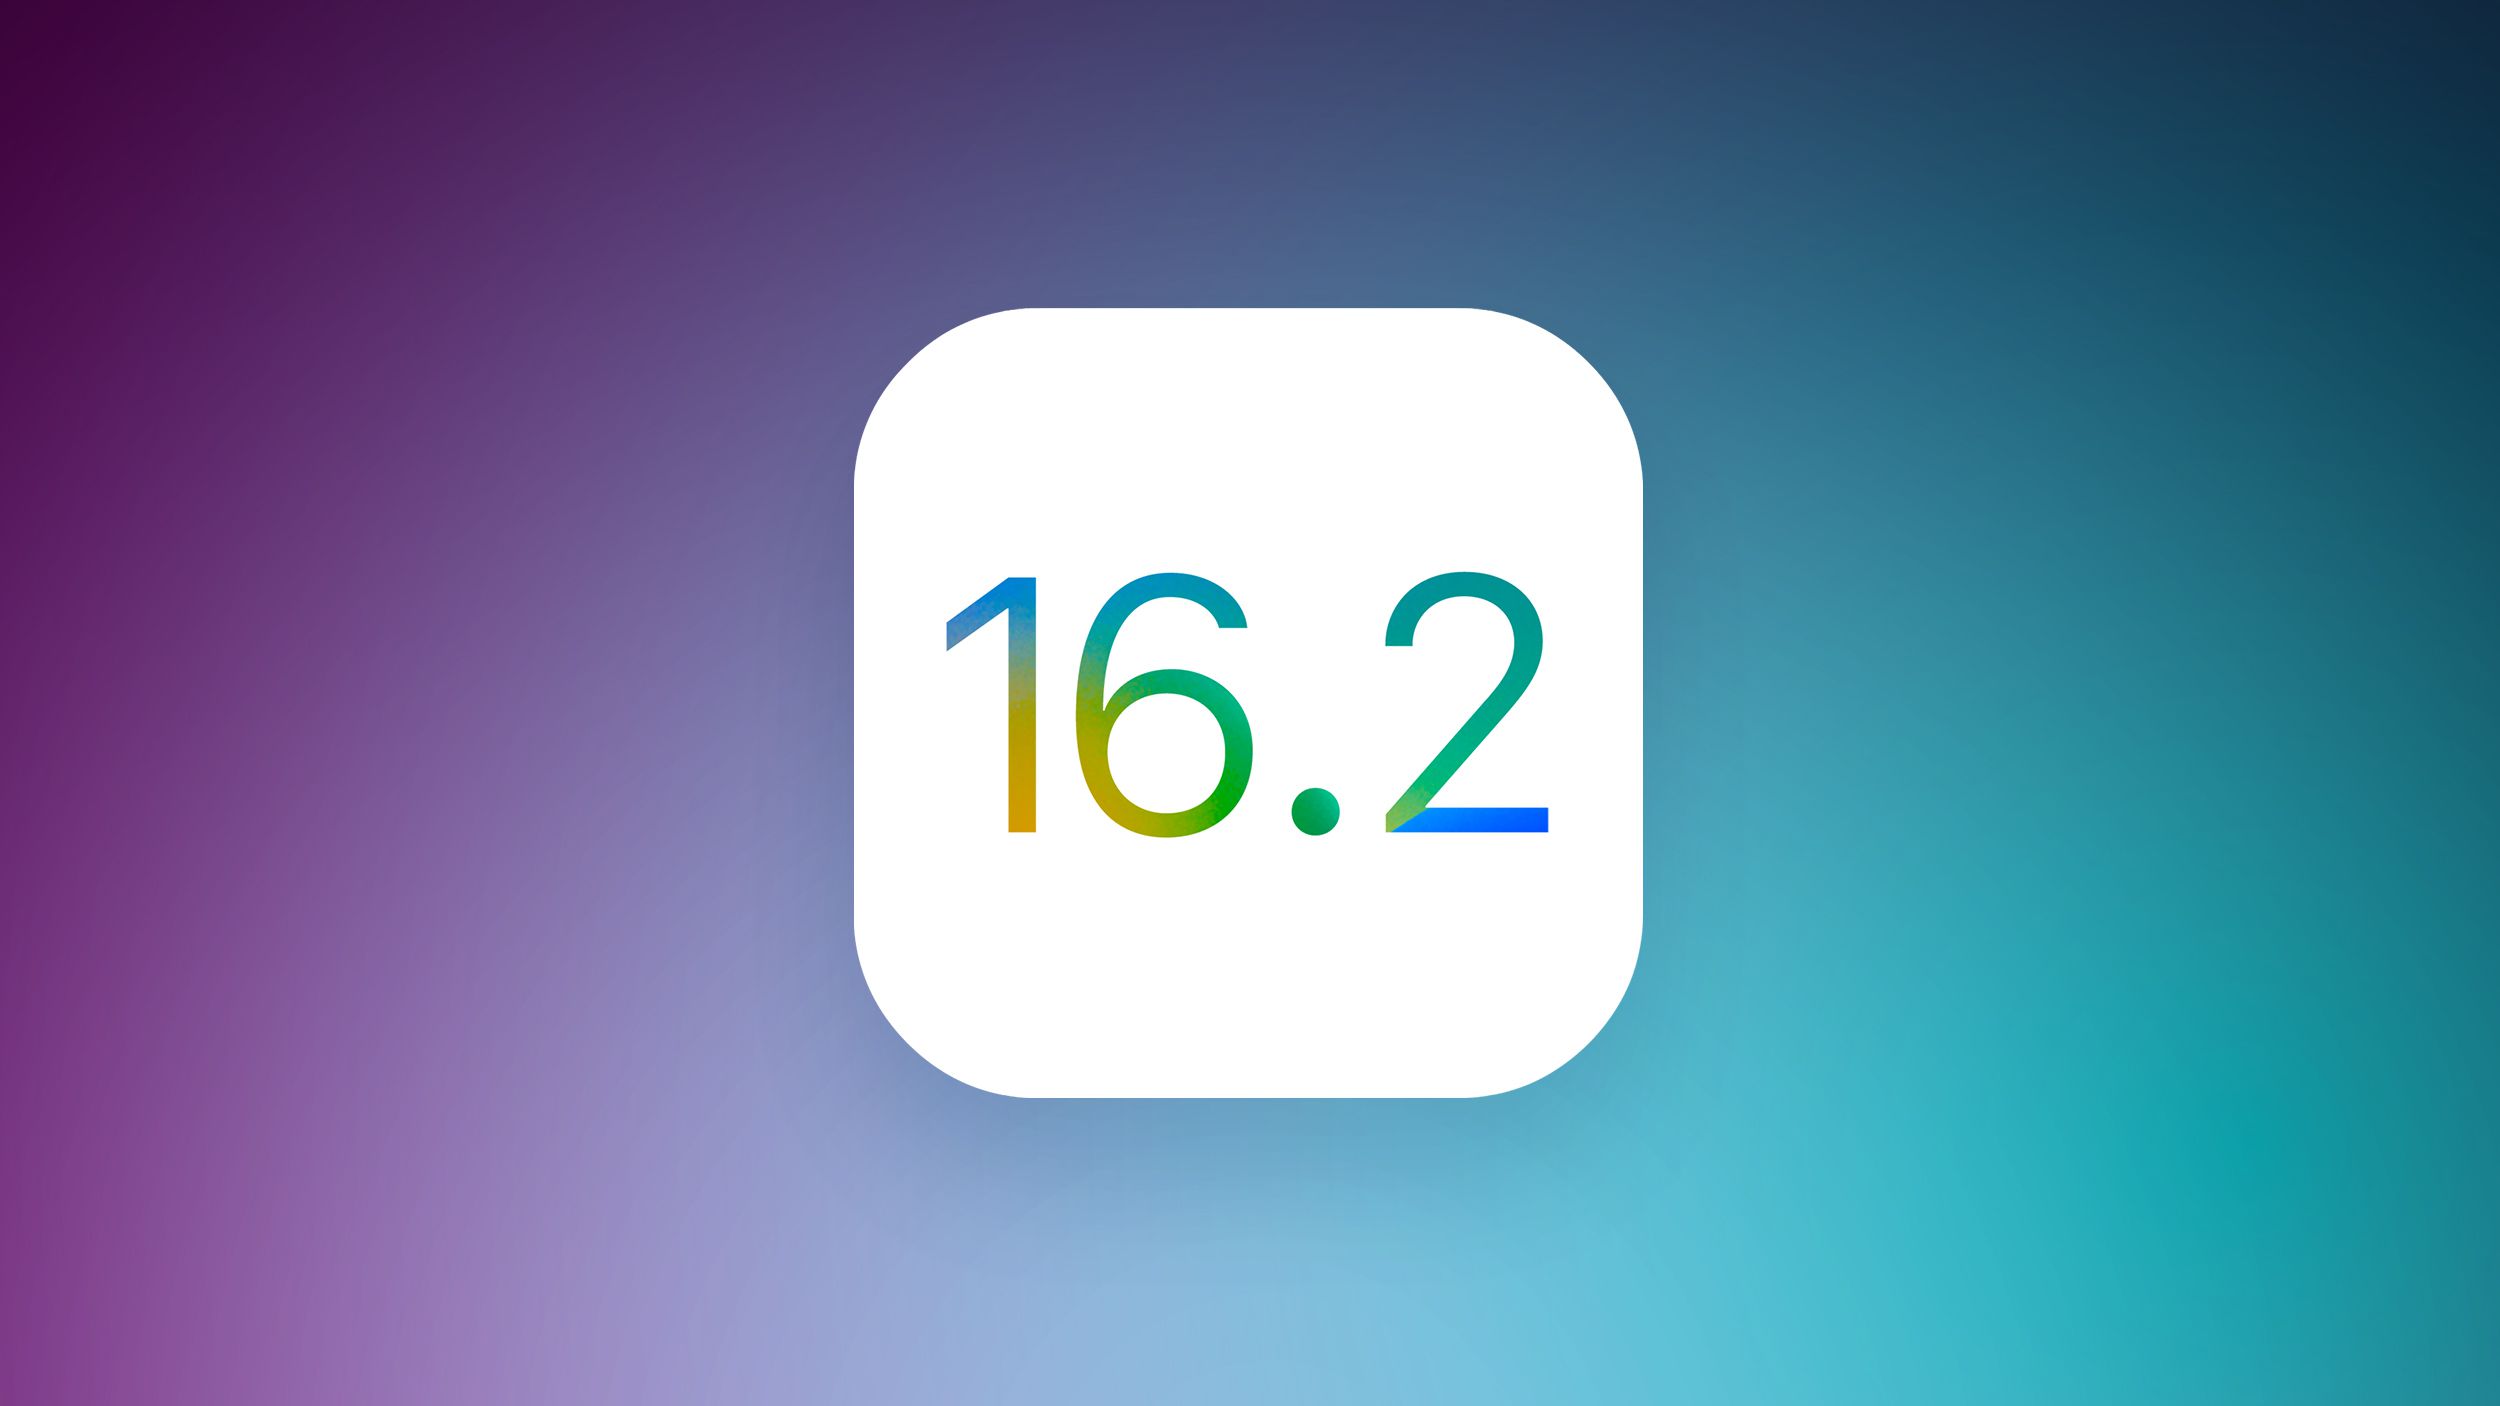 Apple Releases Second Public Betas of iOS 16.2 and iPadOS 16.2 With Freeform App..